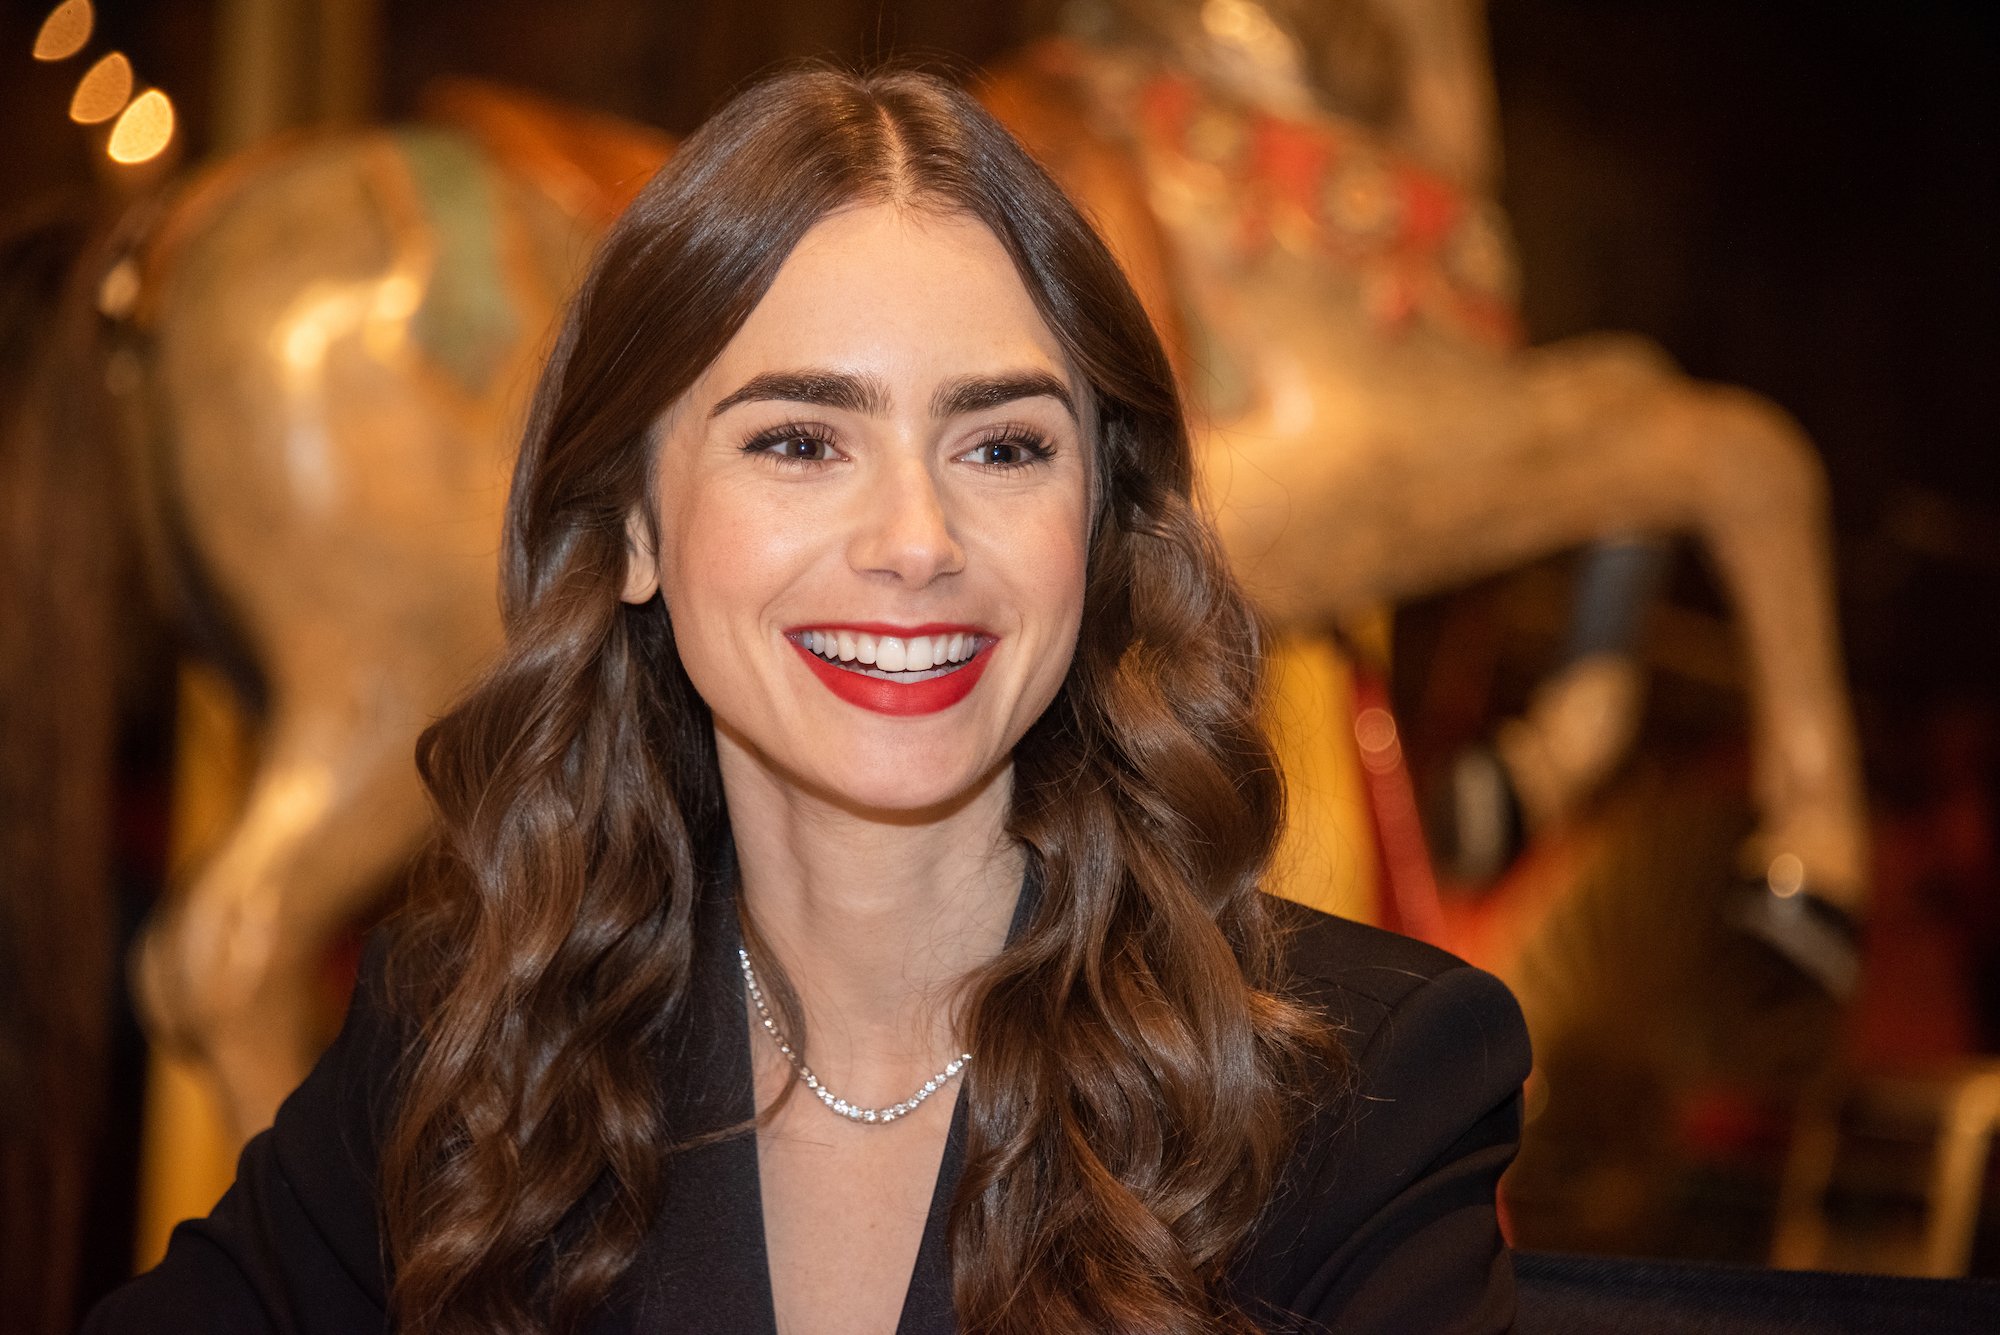 Lily Collins smiling in front of a blurred background